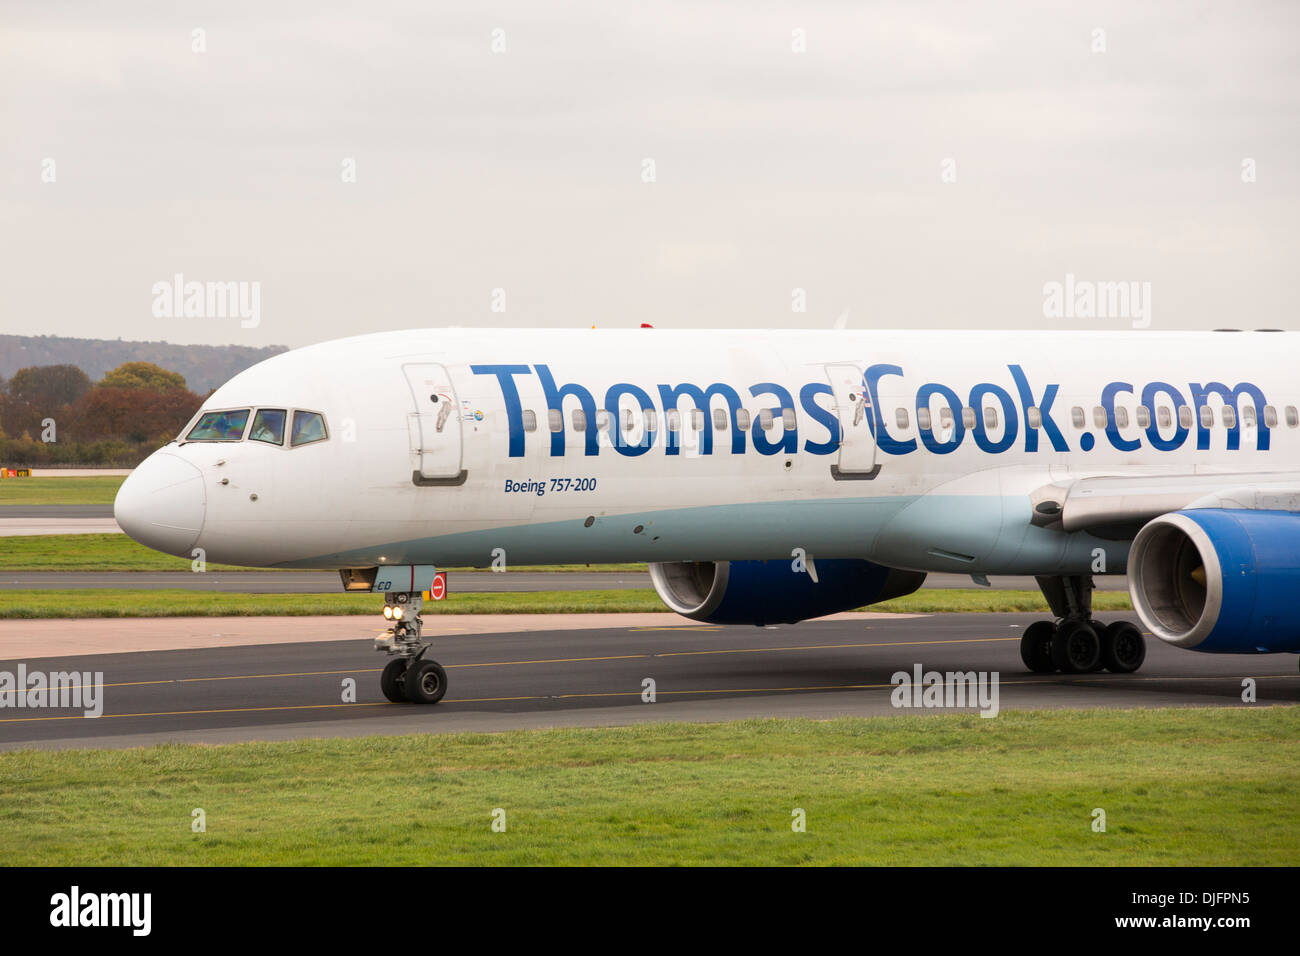 Planes on the tarmac at arrivals at Manchester Airport, UK. Stock Photo